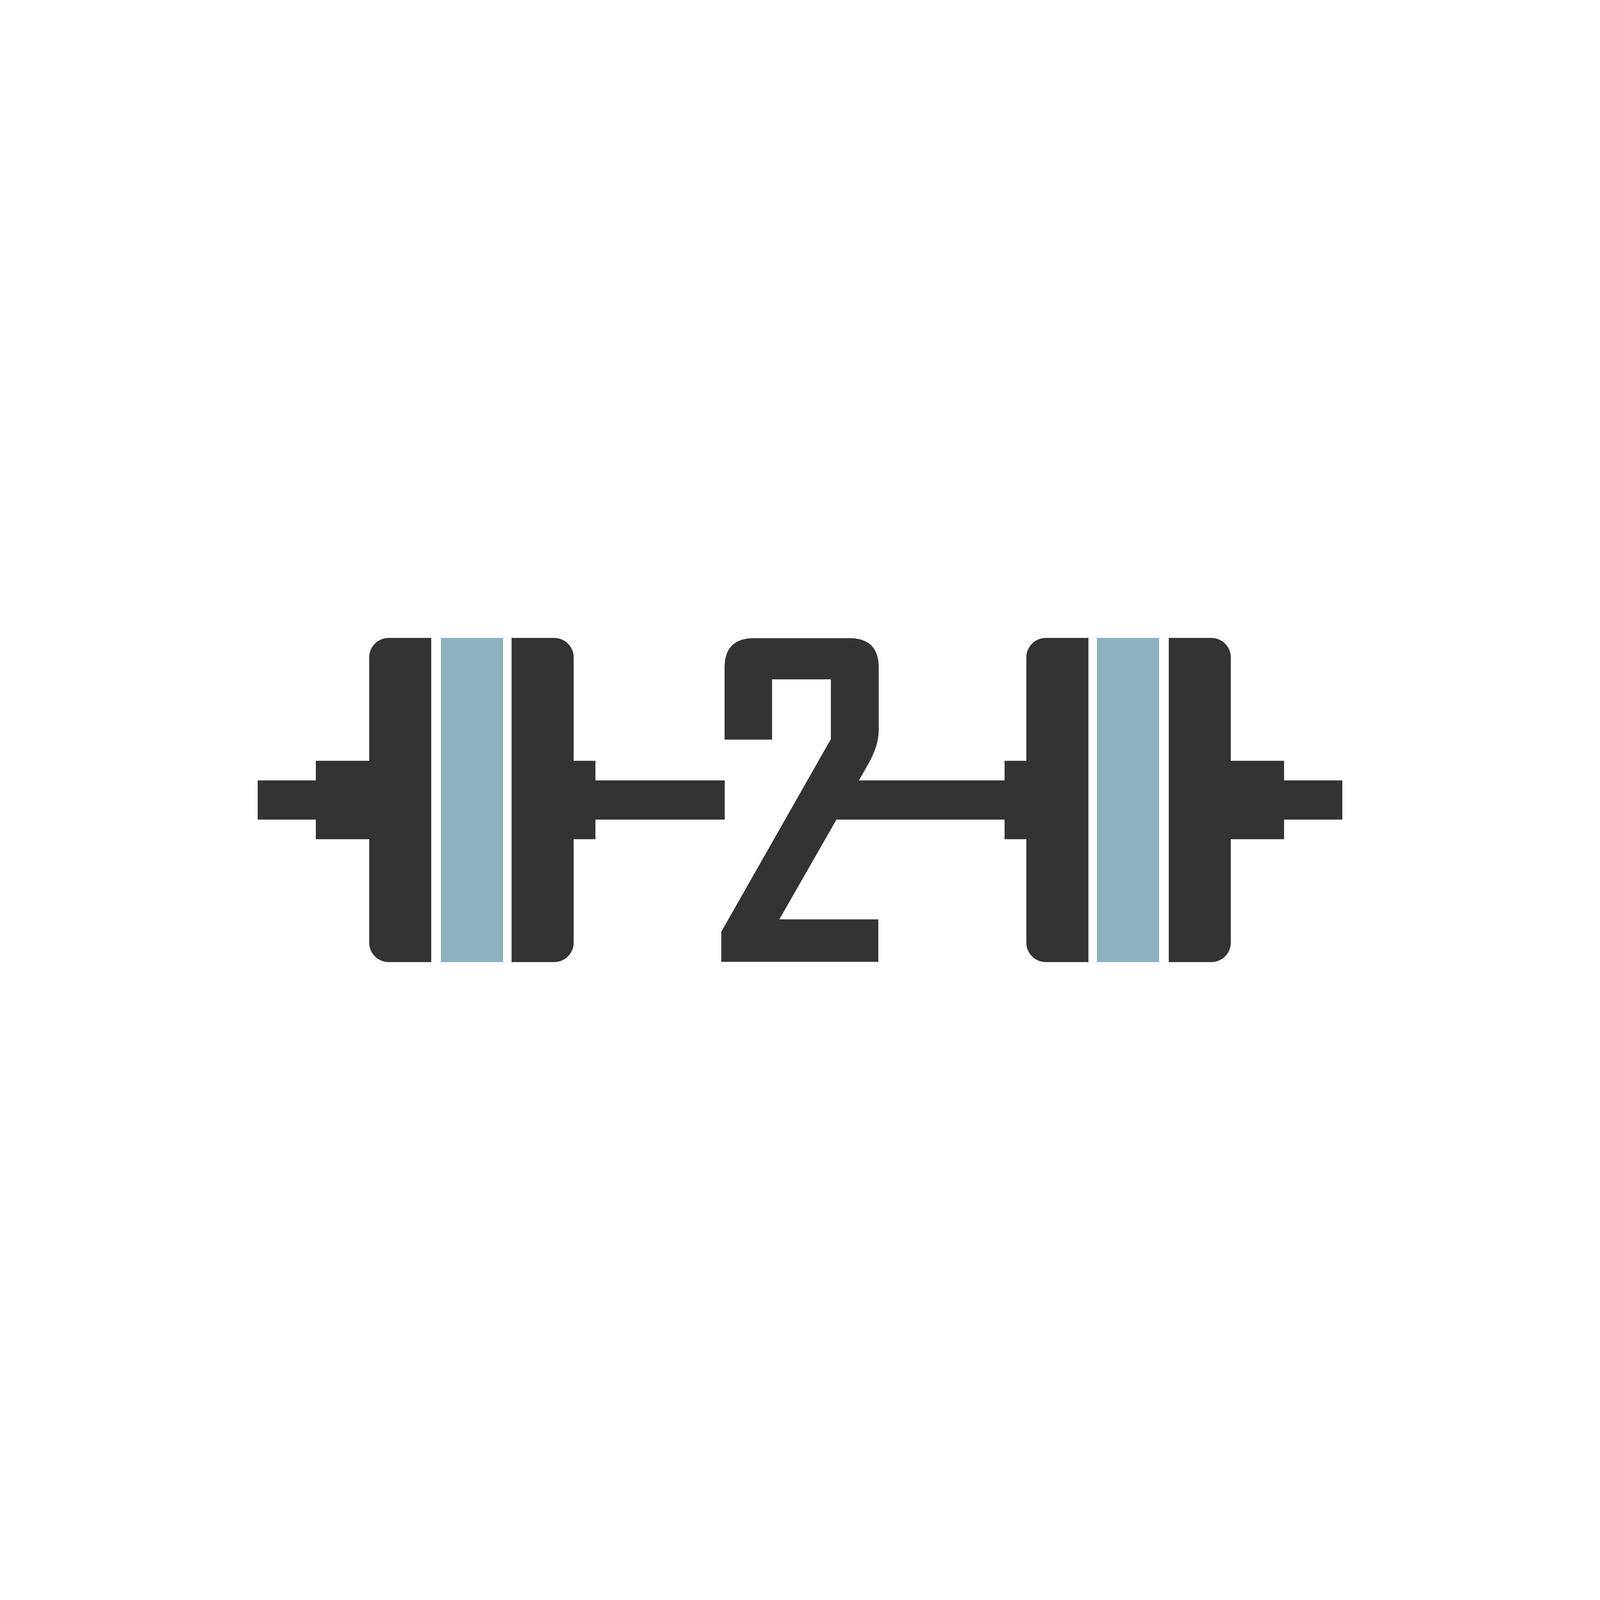 Number 2 with barbell icon fitness design template vector